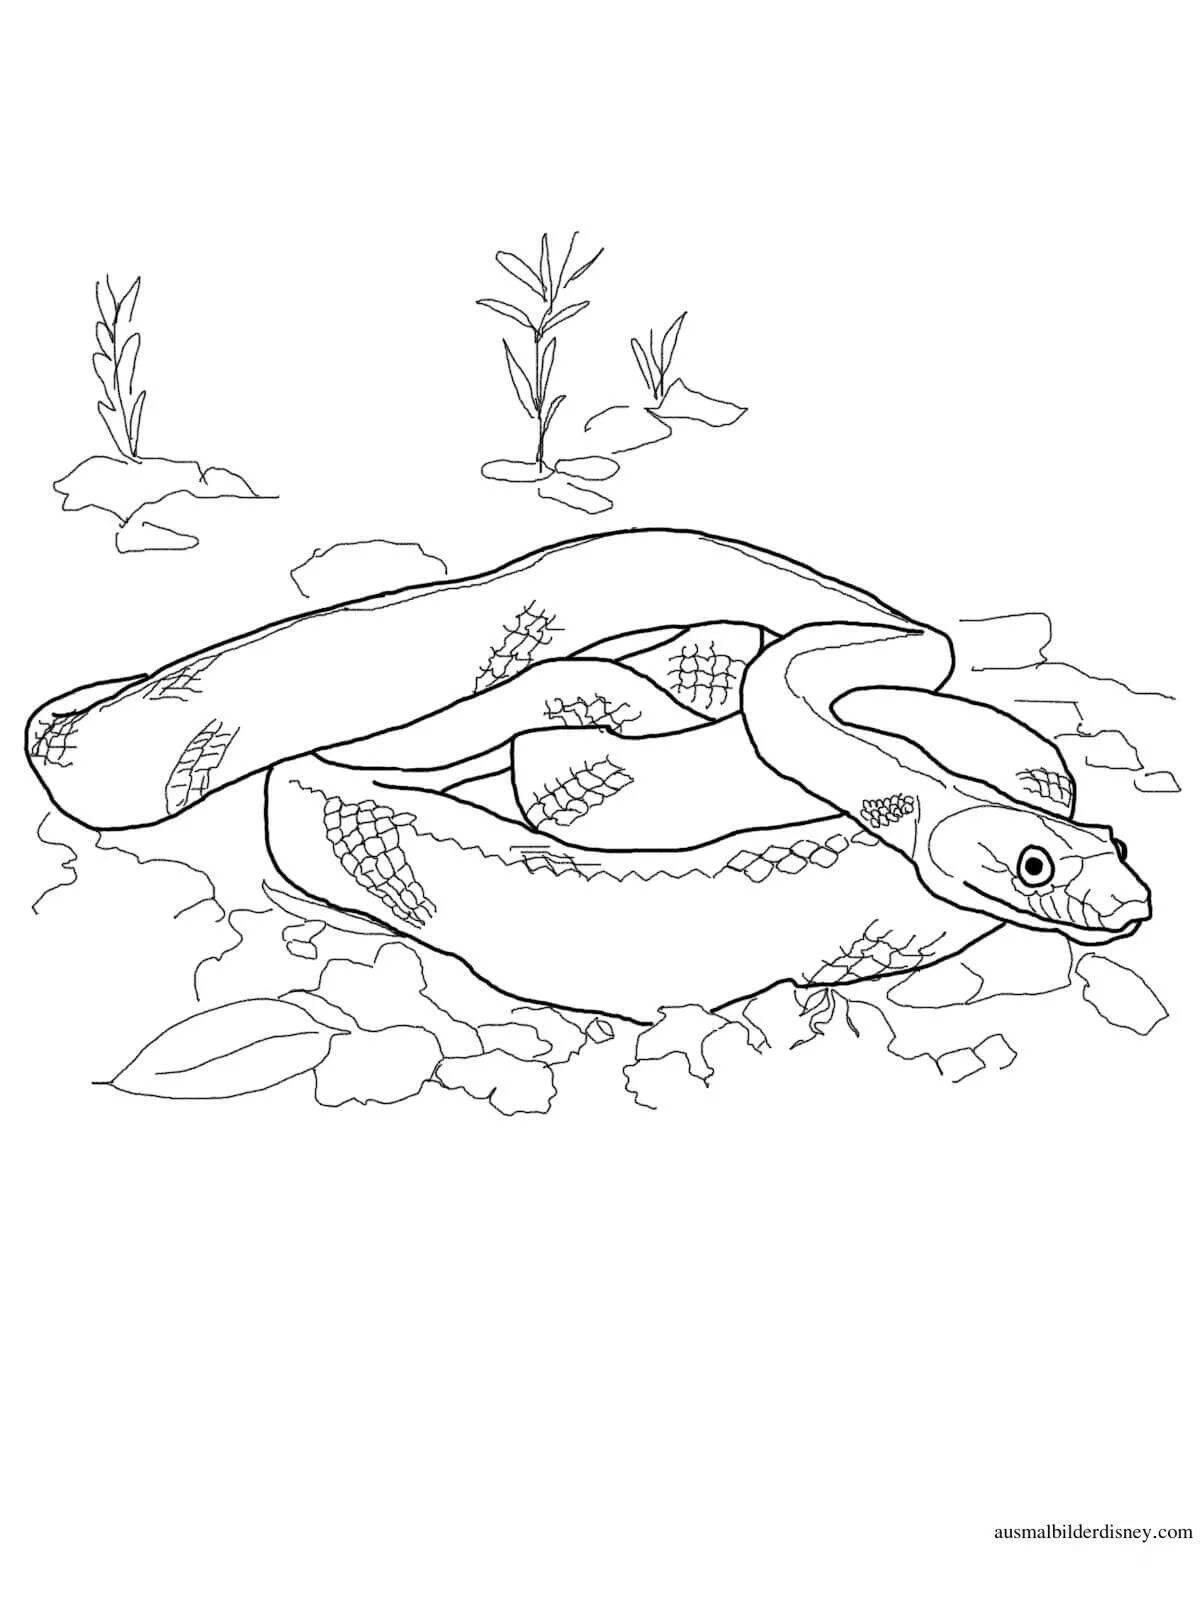 Dazzling Budge blue snake coloring page